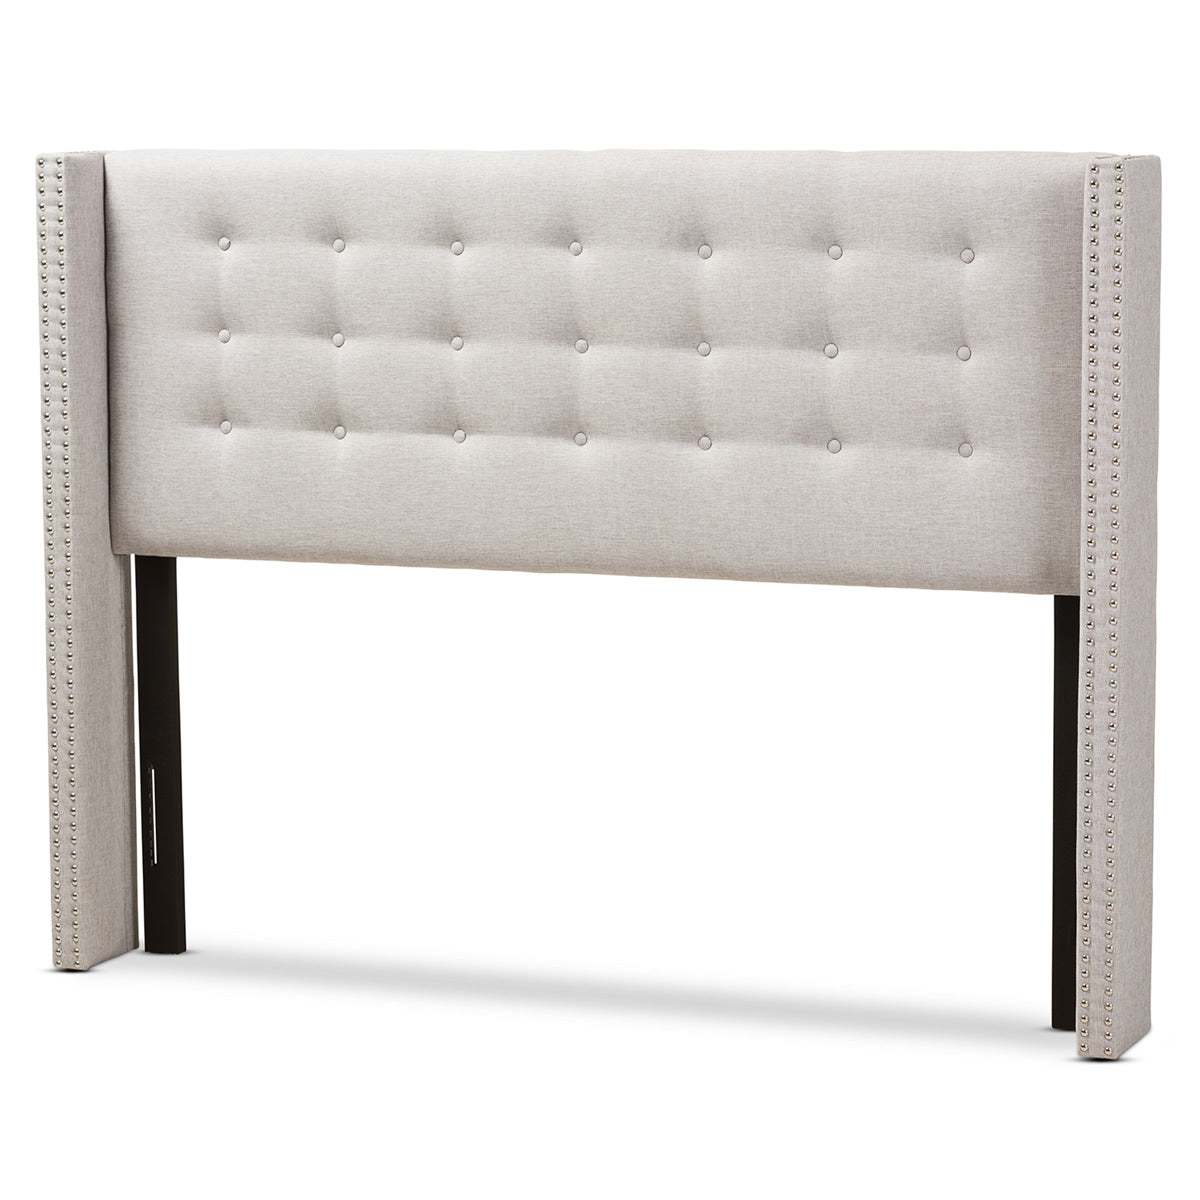 Baxton Studio Ginaro Modern And Contemporary Greyish Beige Fabric Button-Tufted Nail head King Size Winged Headboard Baxton Studio-Headboards-Minimal And Modern - 1